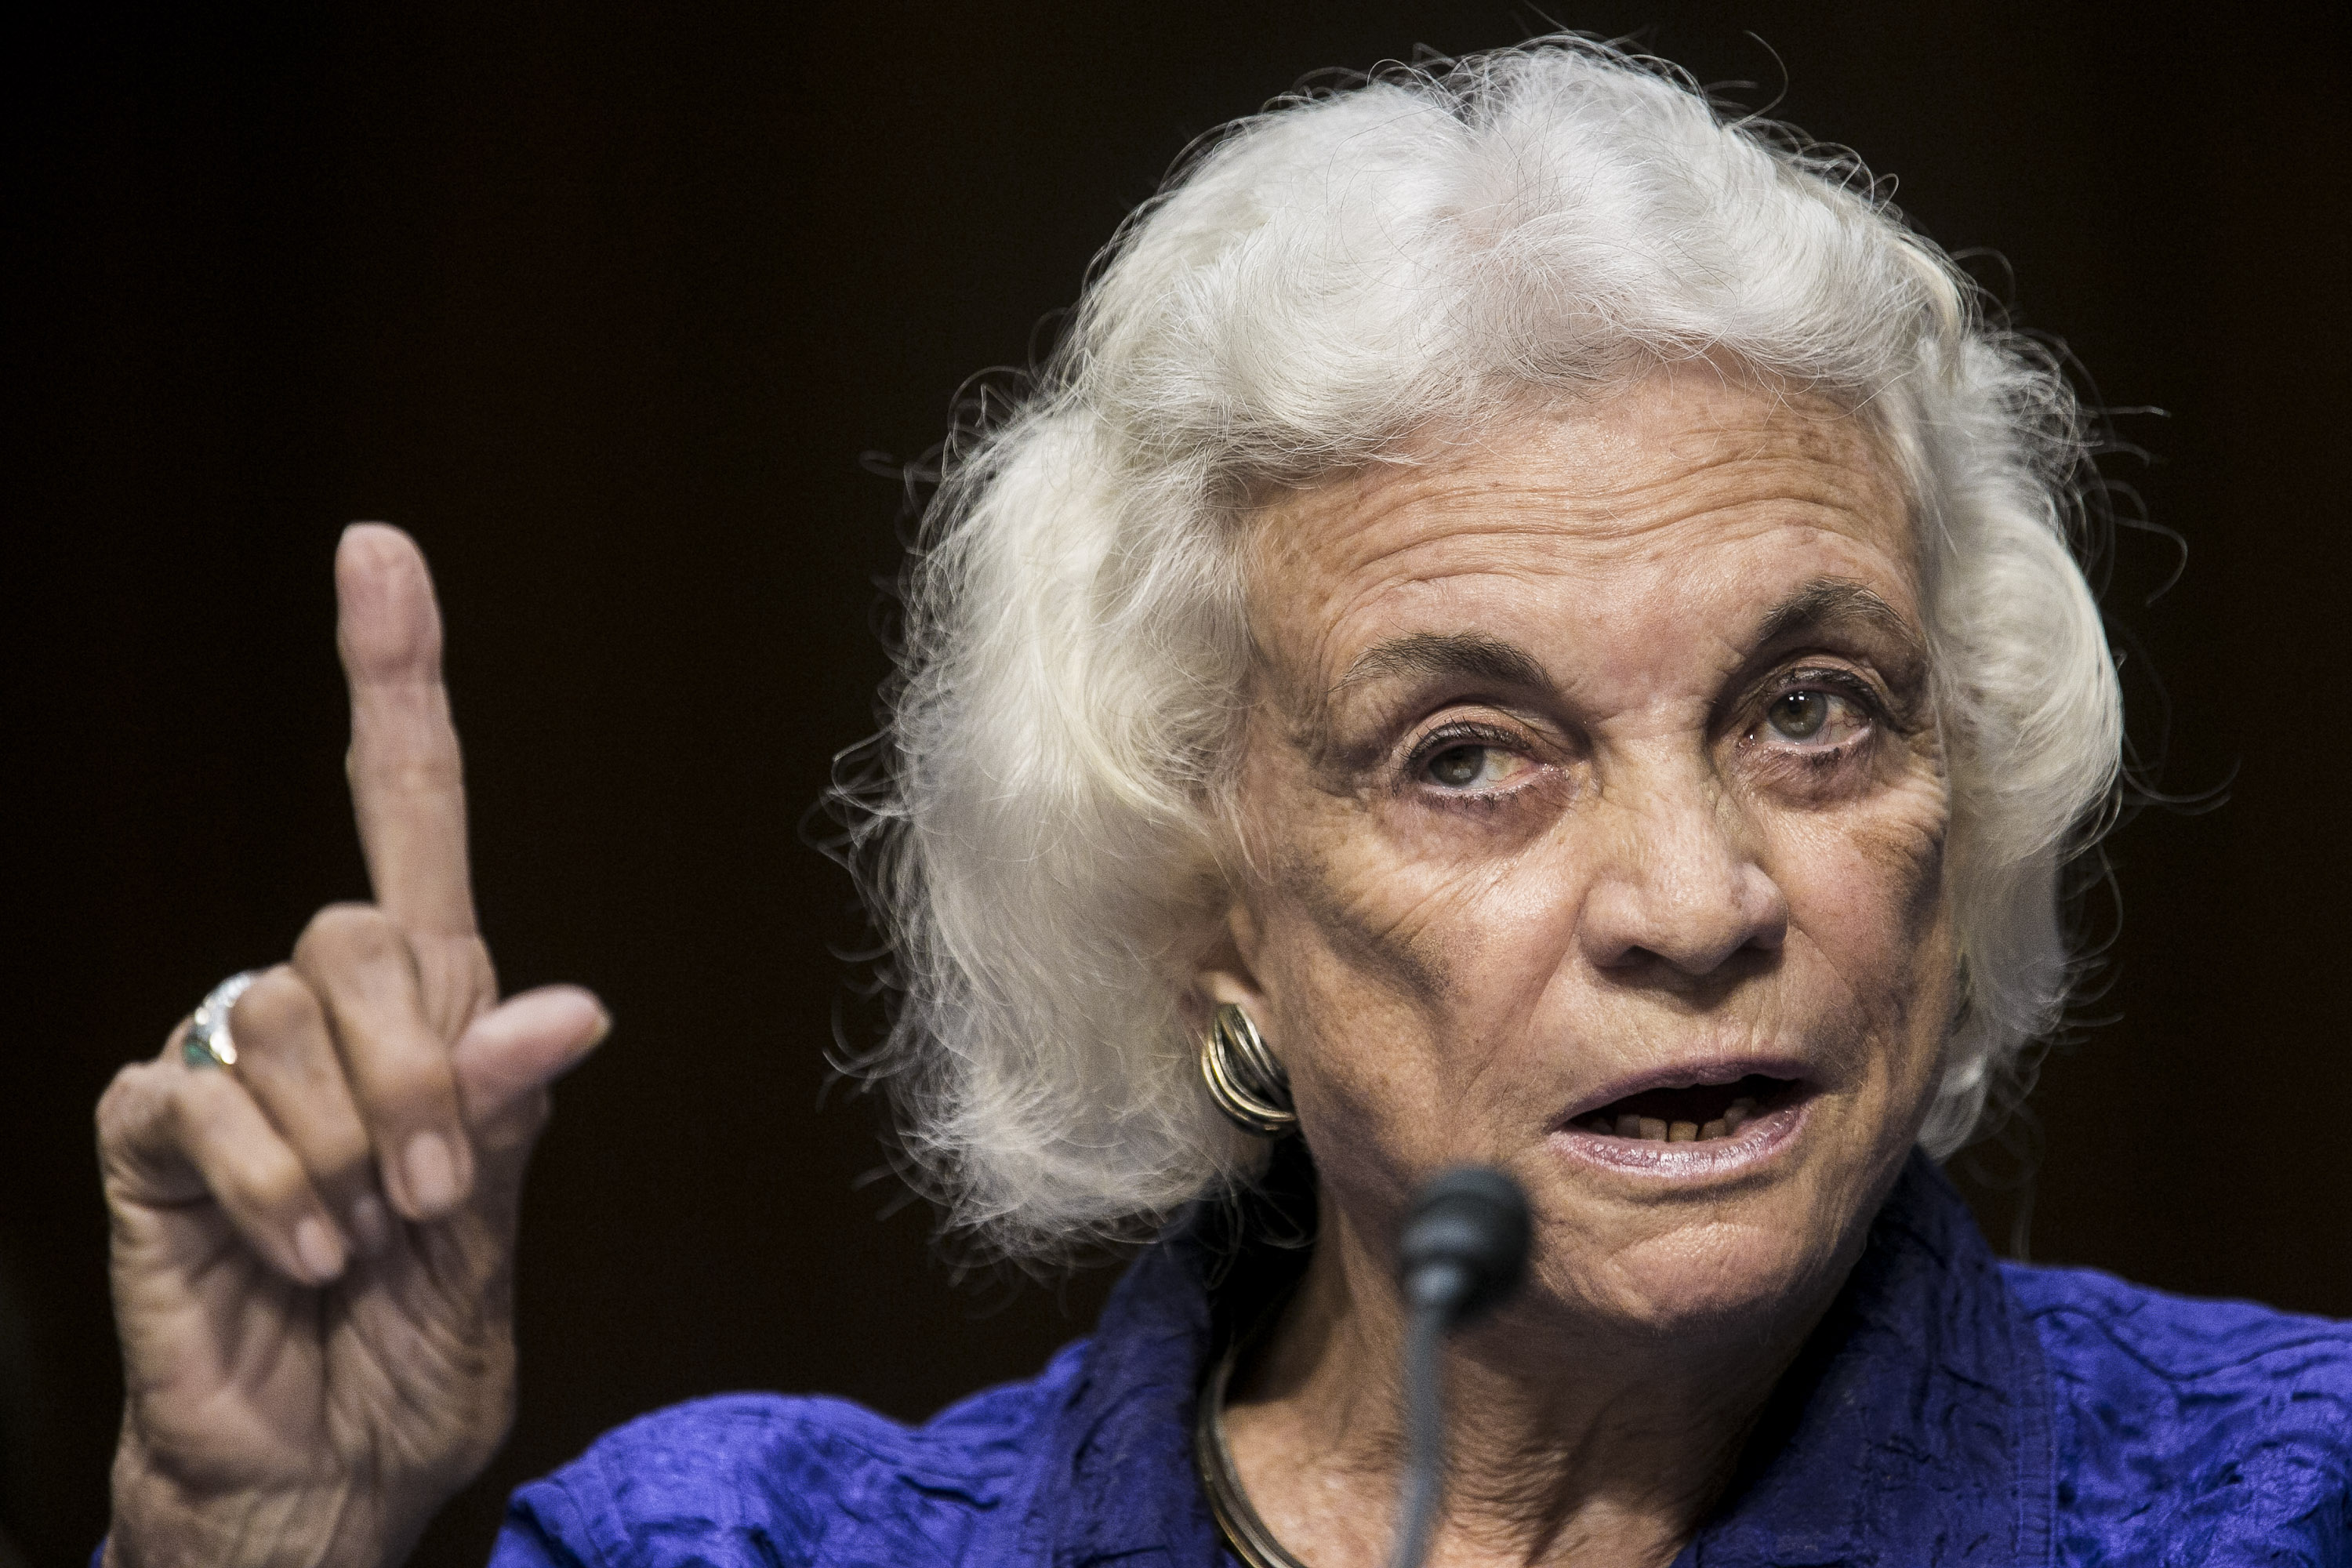 Portraits Of Sandra Day O'Connor - Photo 8 - Pictures - CBS News3000 x 2000